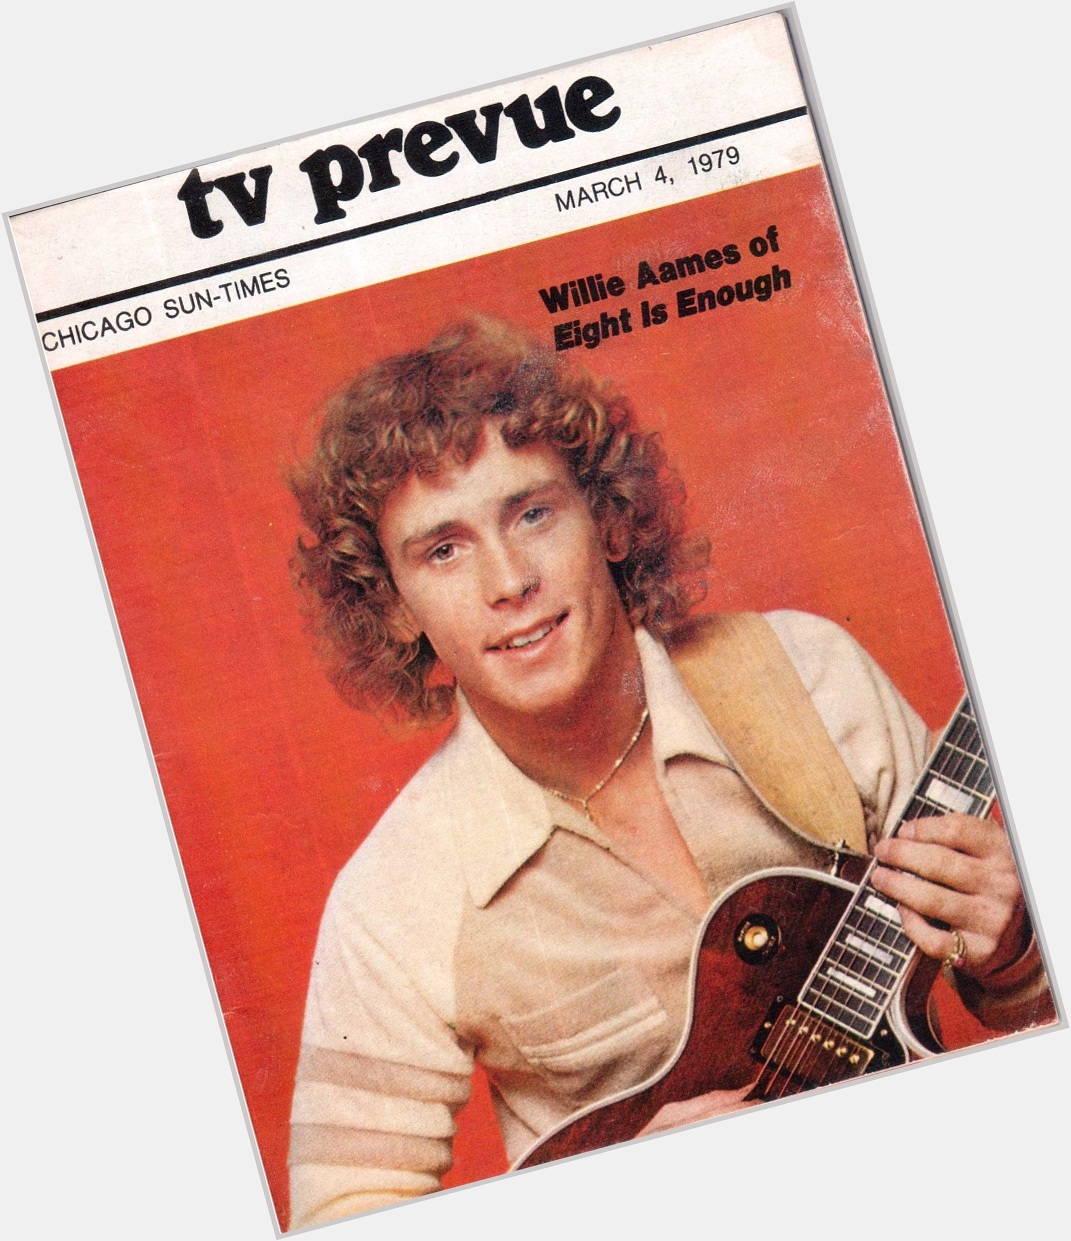 Happy Birthday to Willie Aames, born on this day in 1960
Chicago Sun-Times TV Prevue.  March 4-10, 1979 